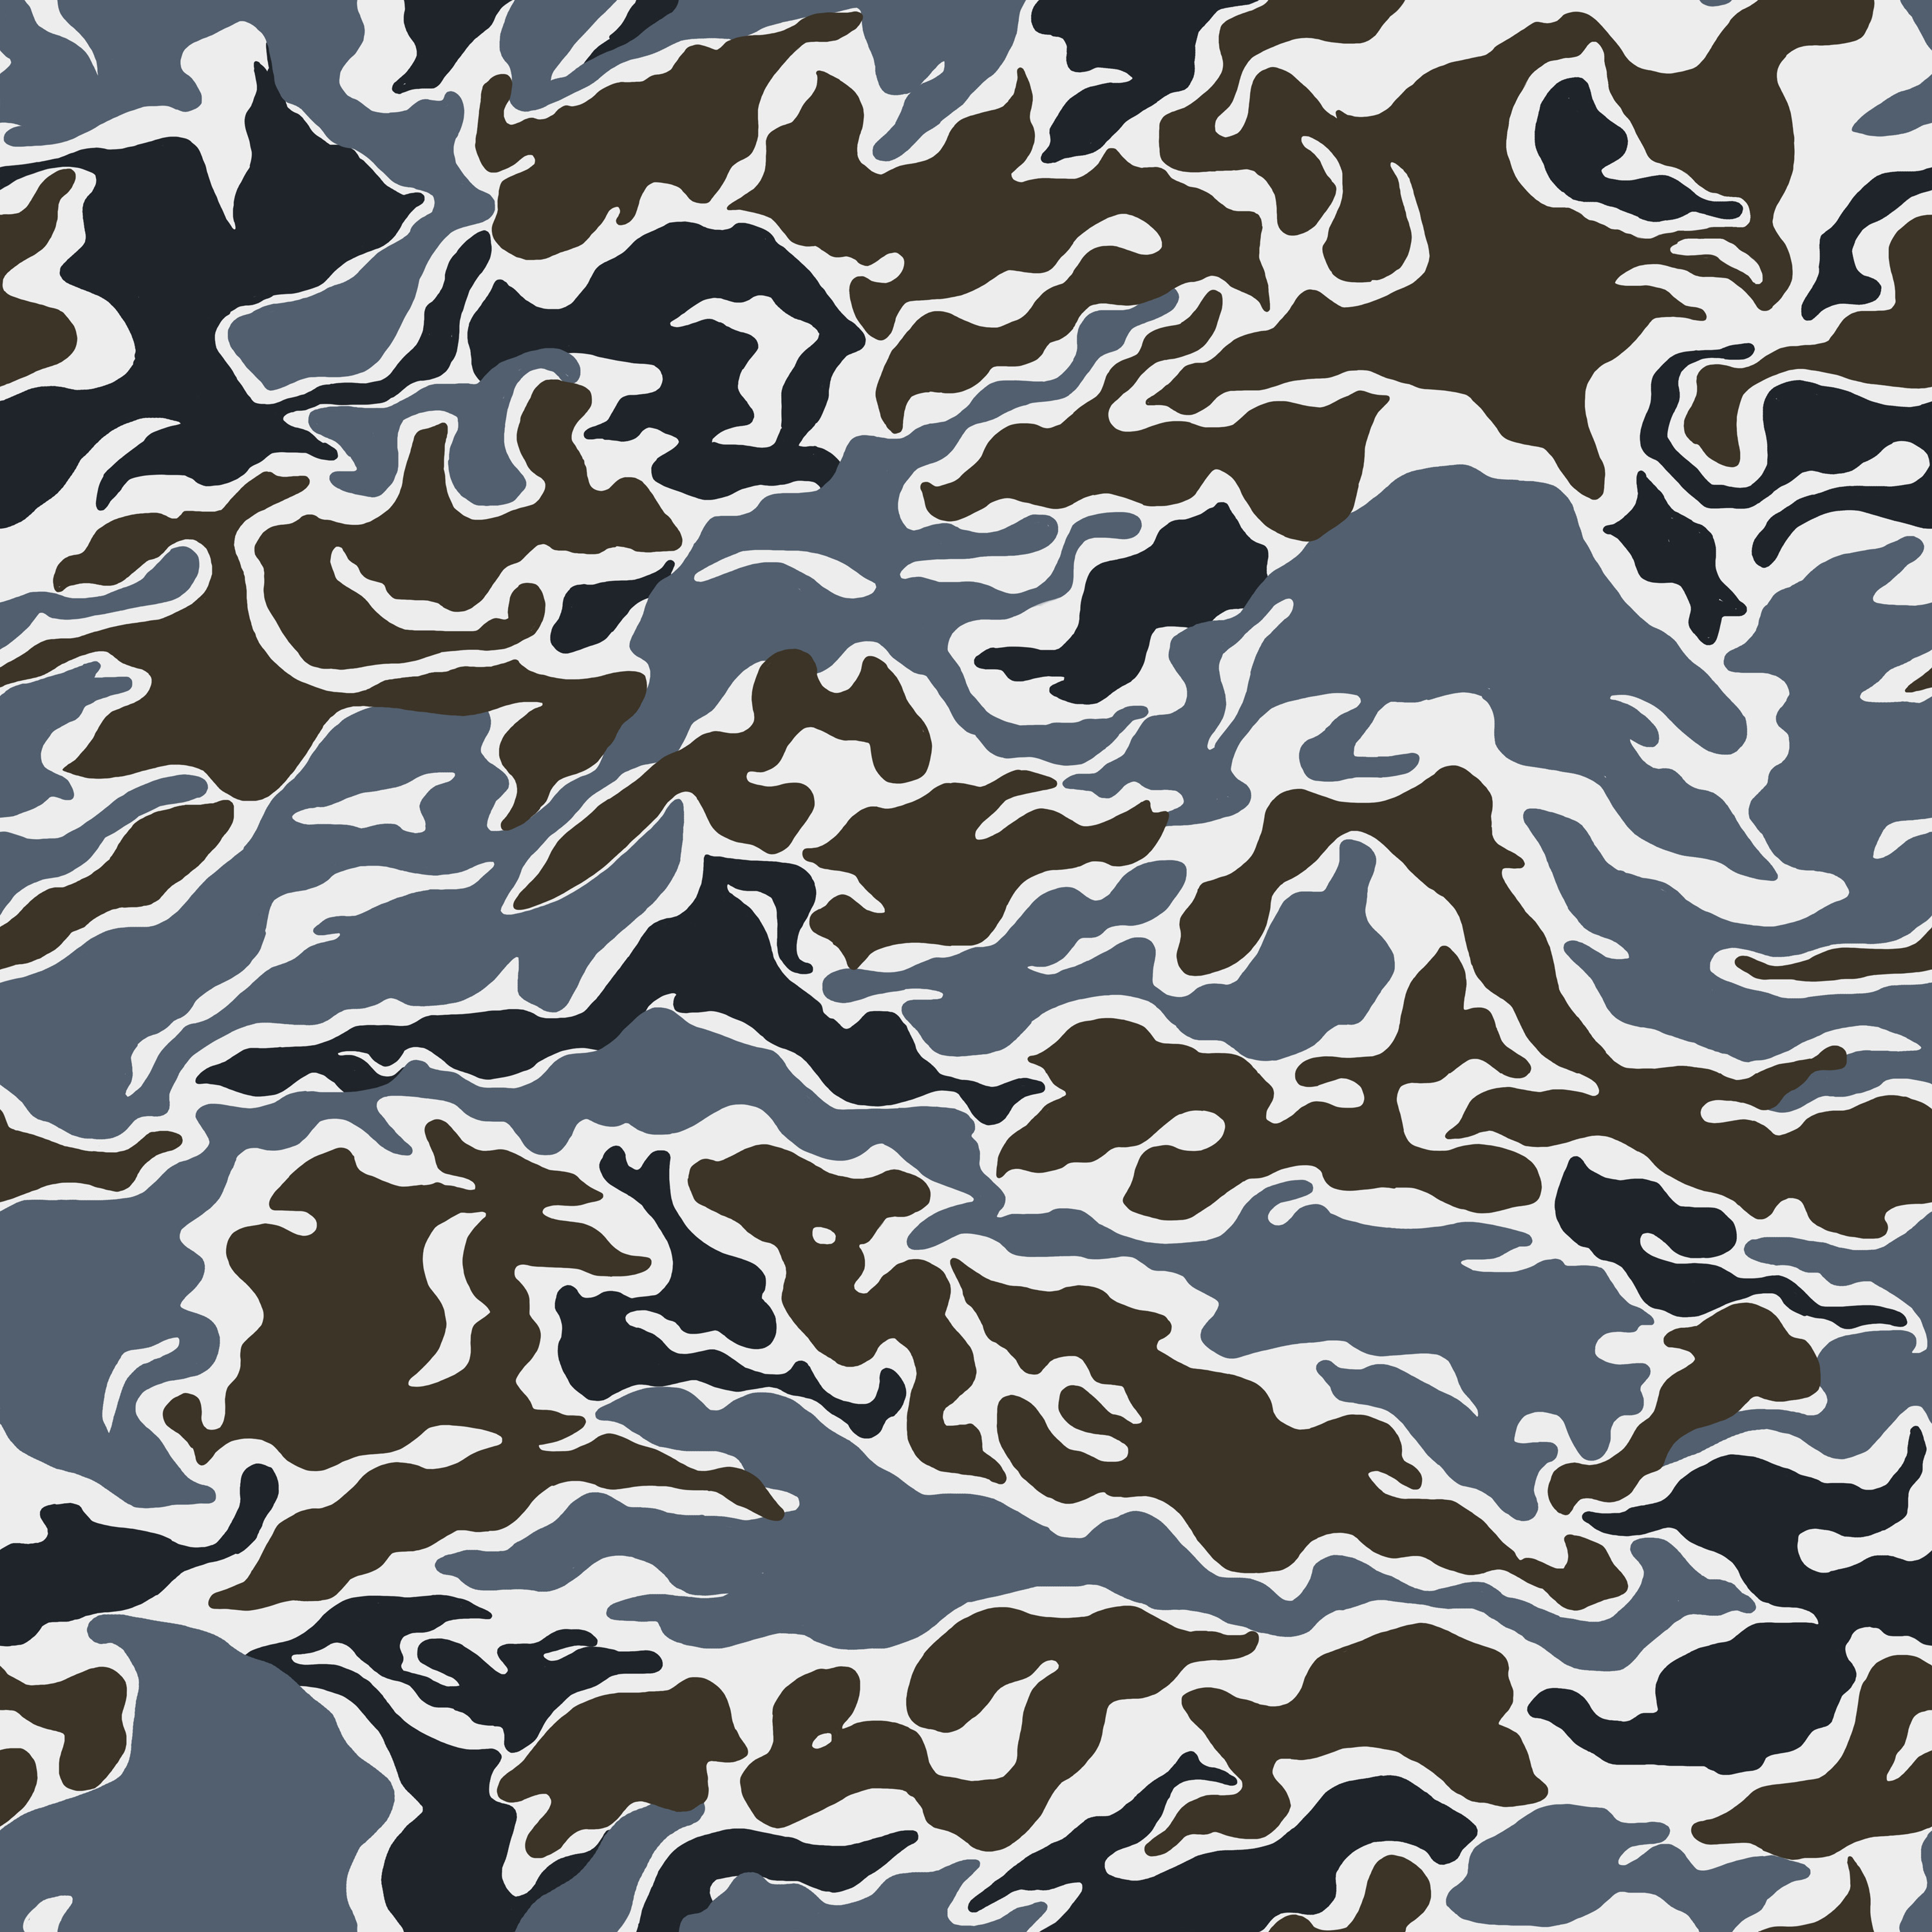 camouflage, police, texture, download background, police camo, camouflage